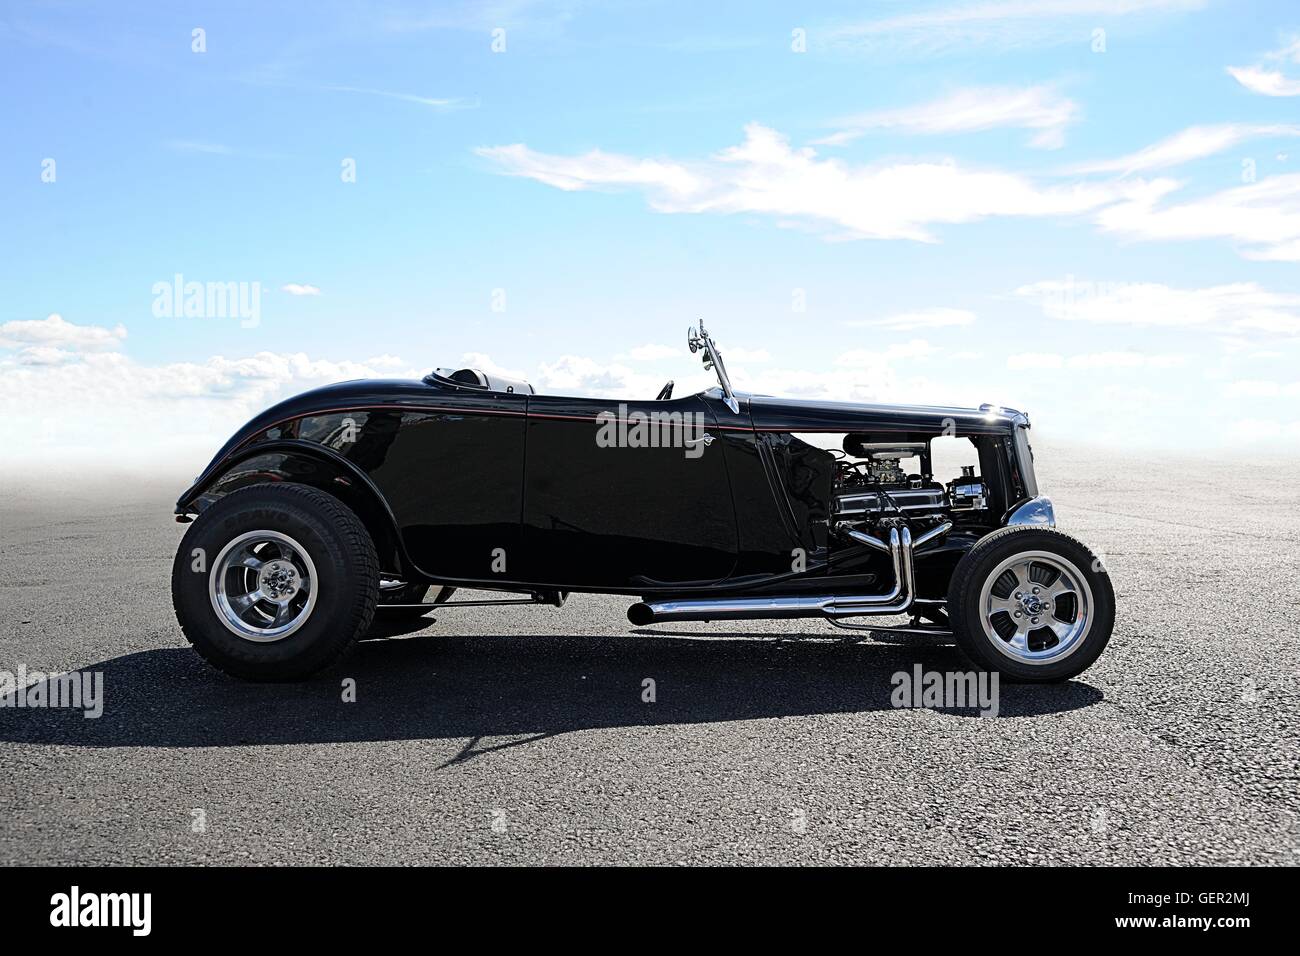 1937 Ford Coupe  Hot Rod standing on an airfield drag strip on a sunny day Stock Photo